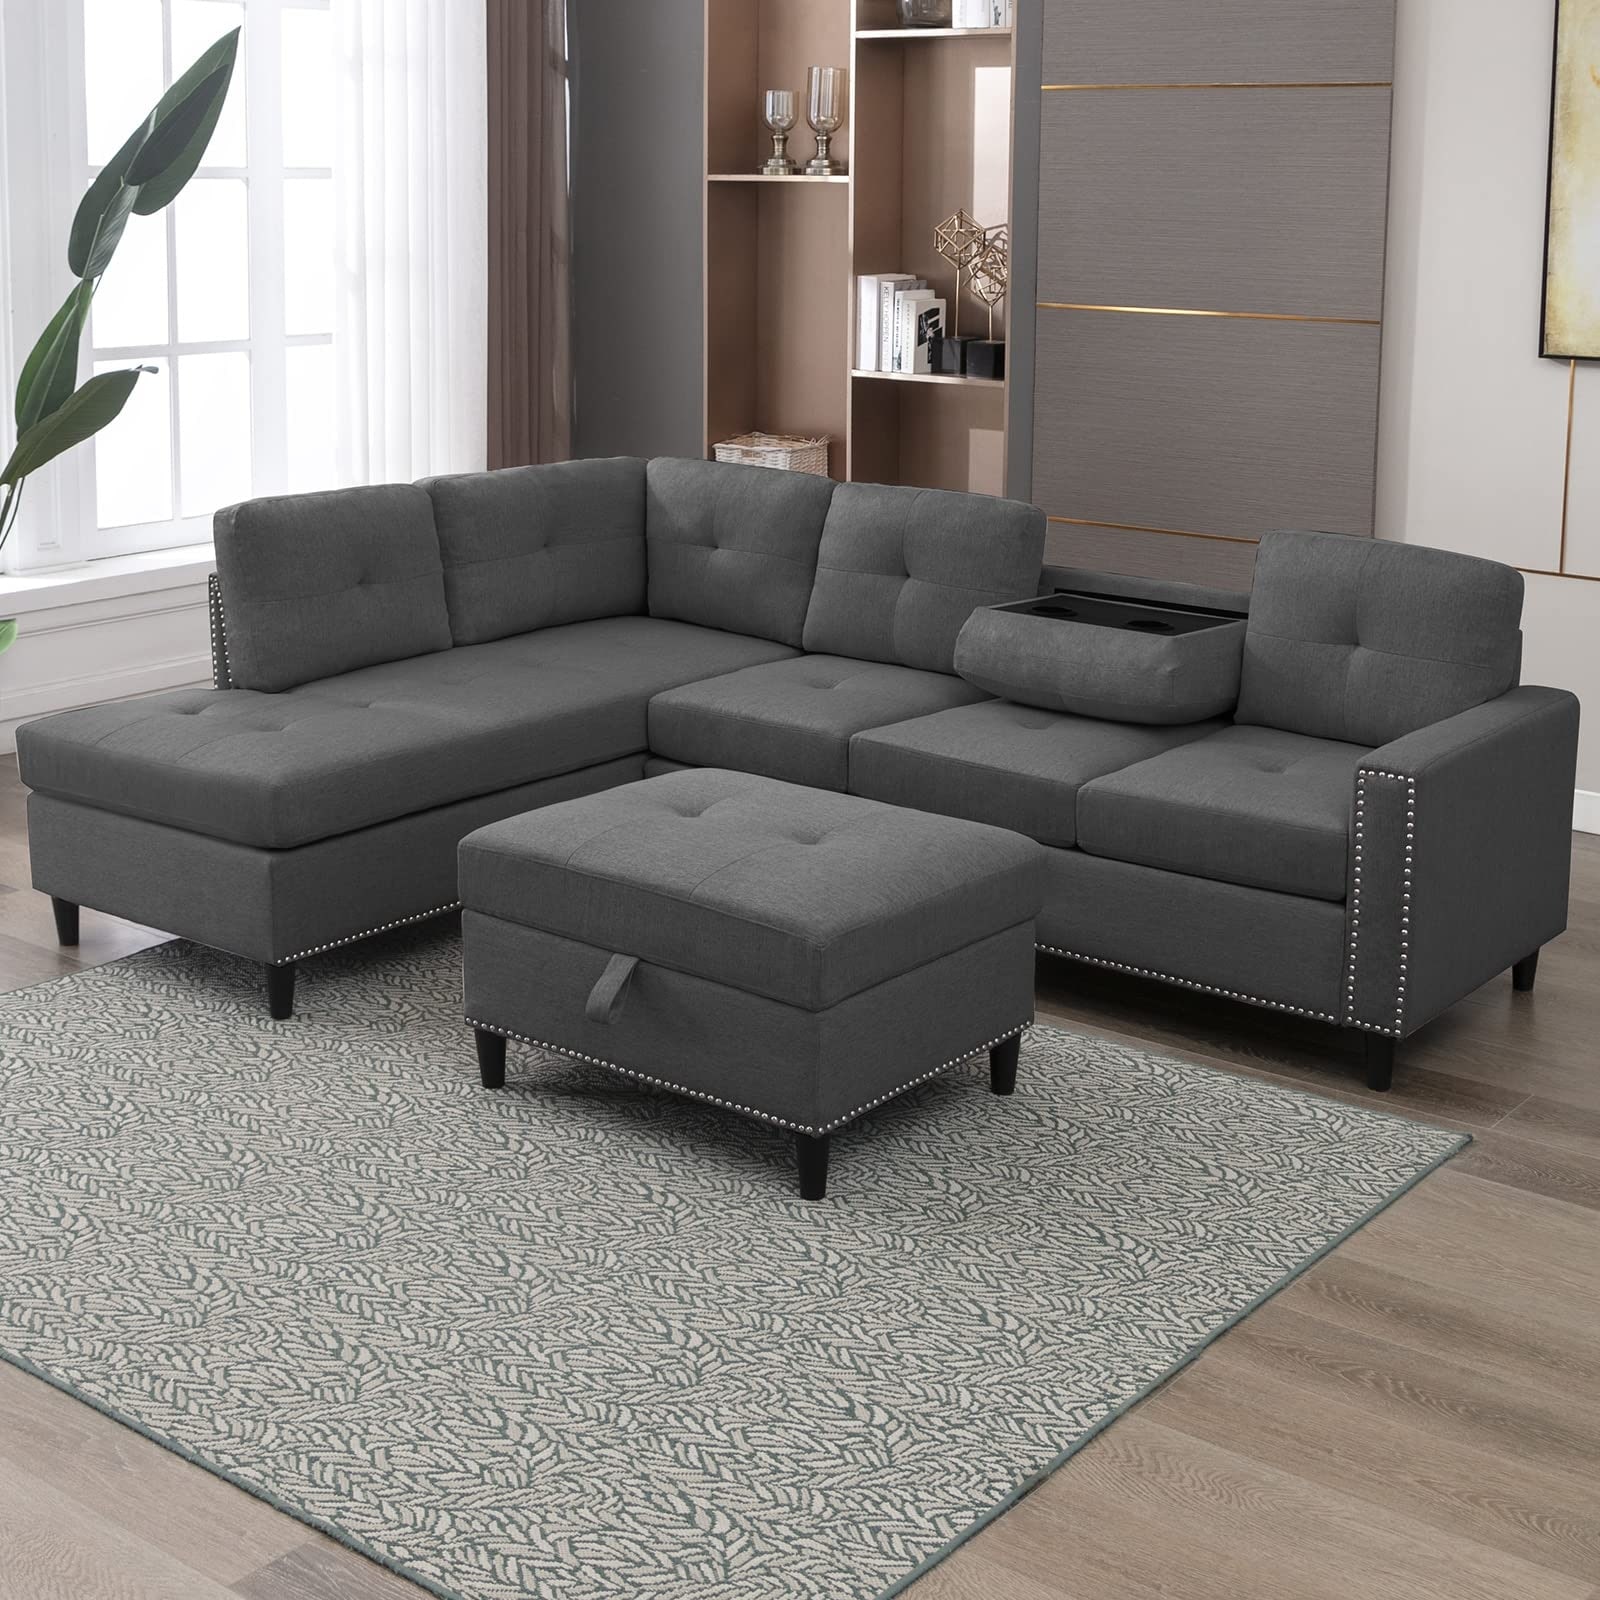 Mixoy L-Shaped Sectional Sofa with 2 Cup Holders,Storage Ottoman